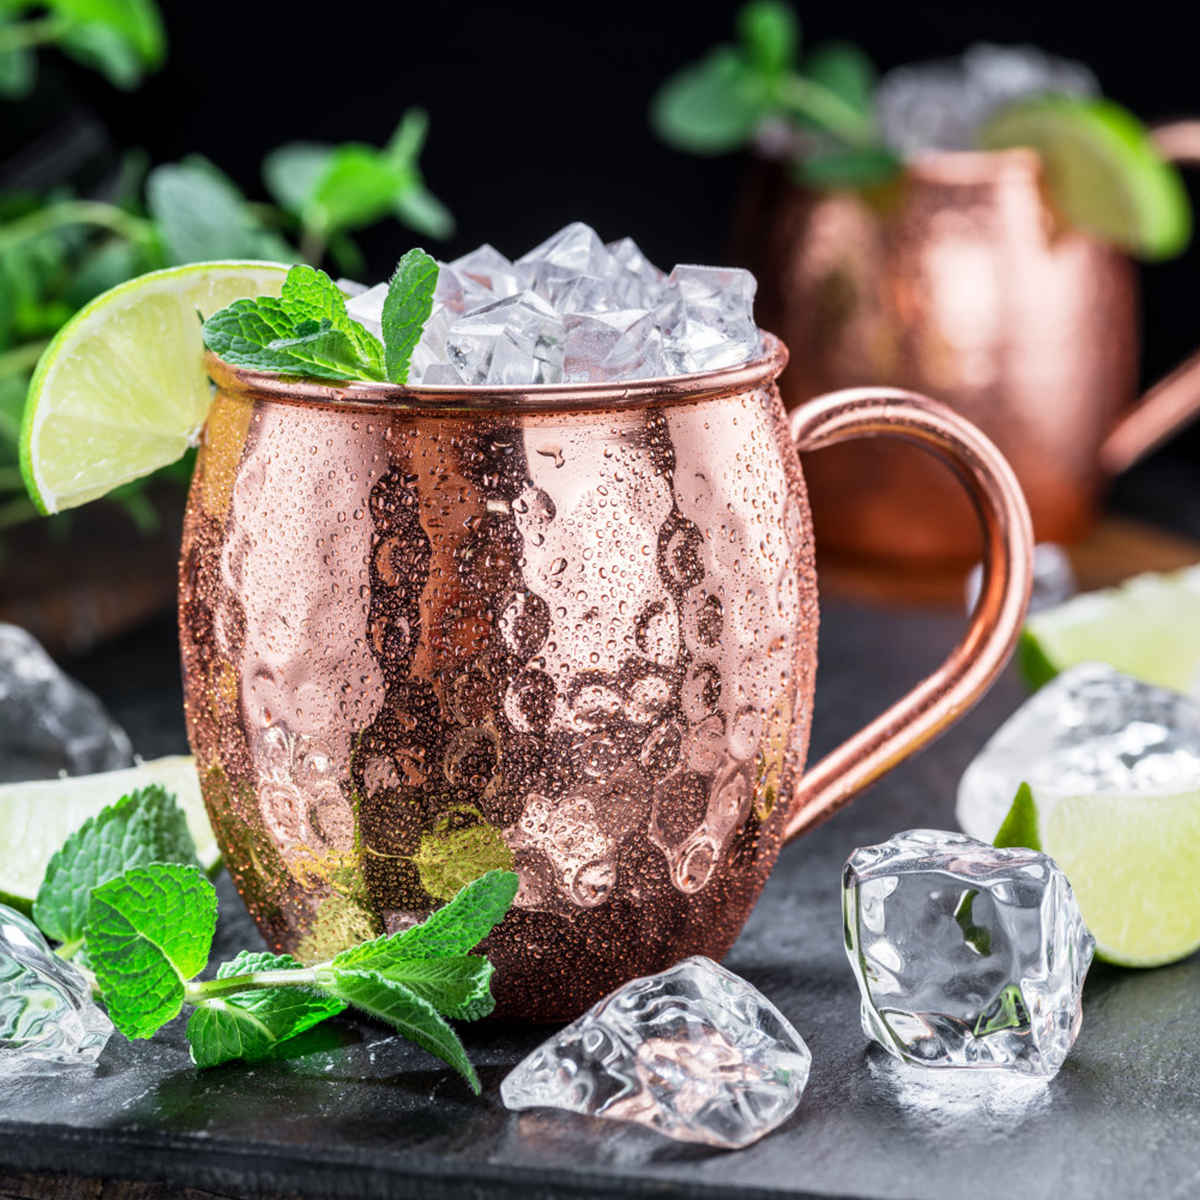 Moscow-Mule-Cups-Set-Copper-Mugs-Moscow-Mule-Mug-with-Shot-Glasses-1947569-10